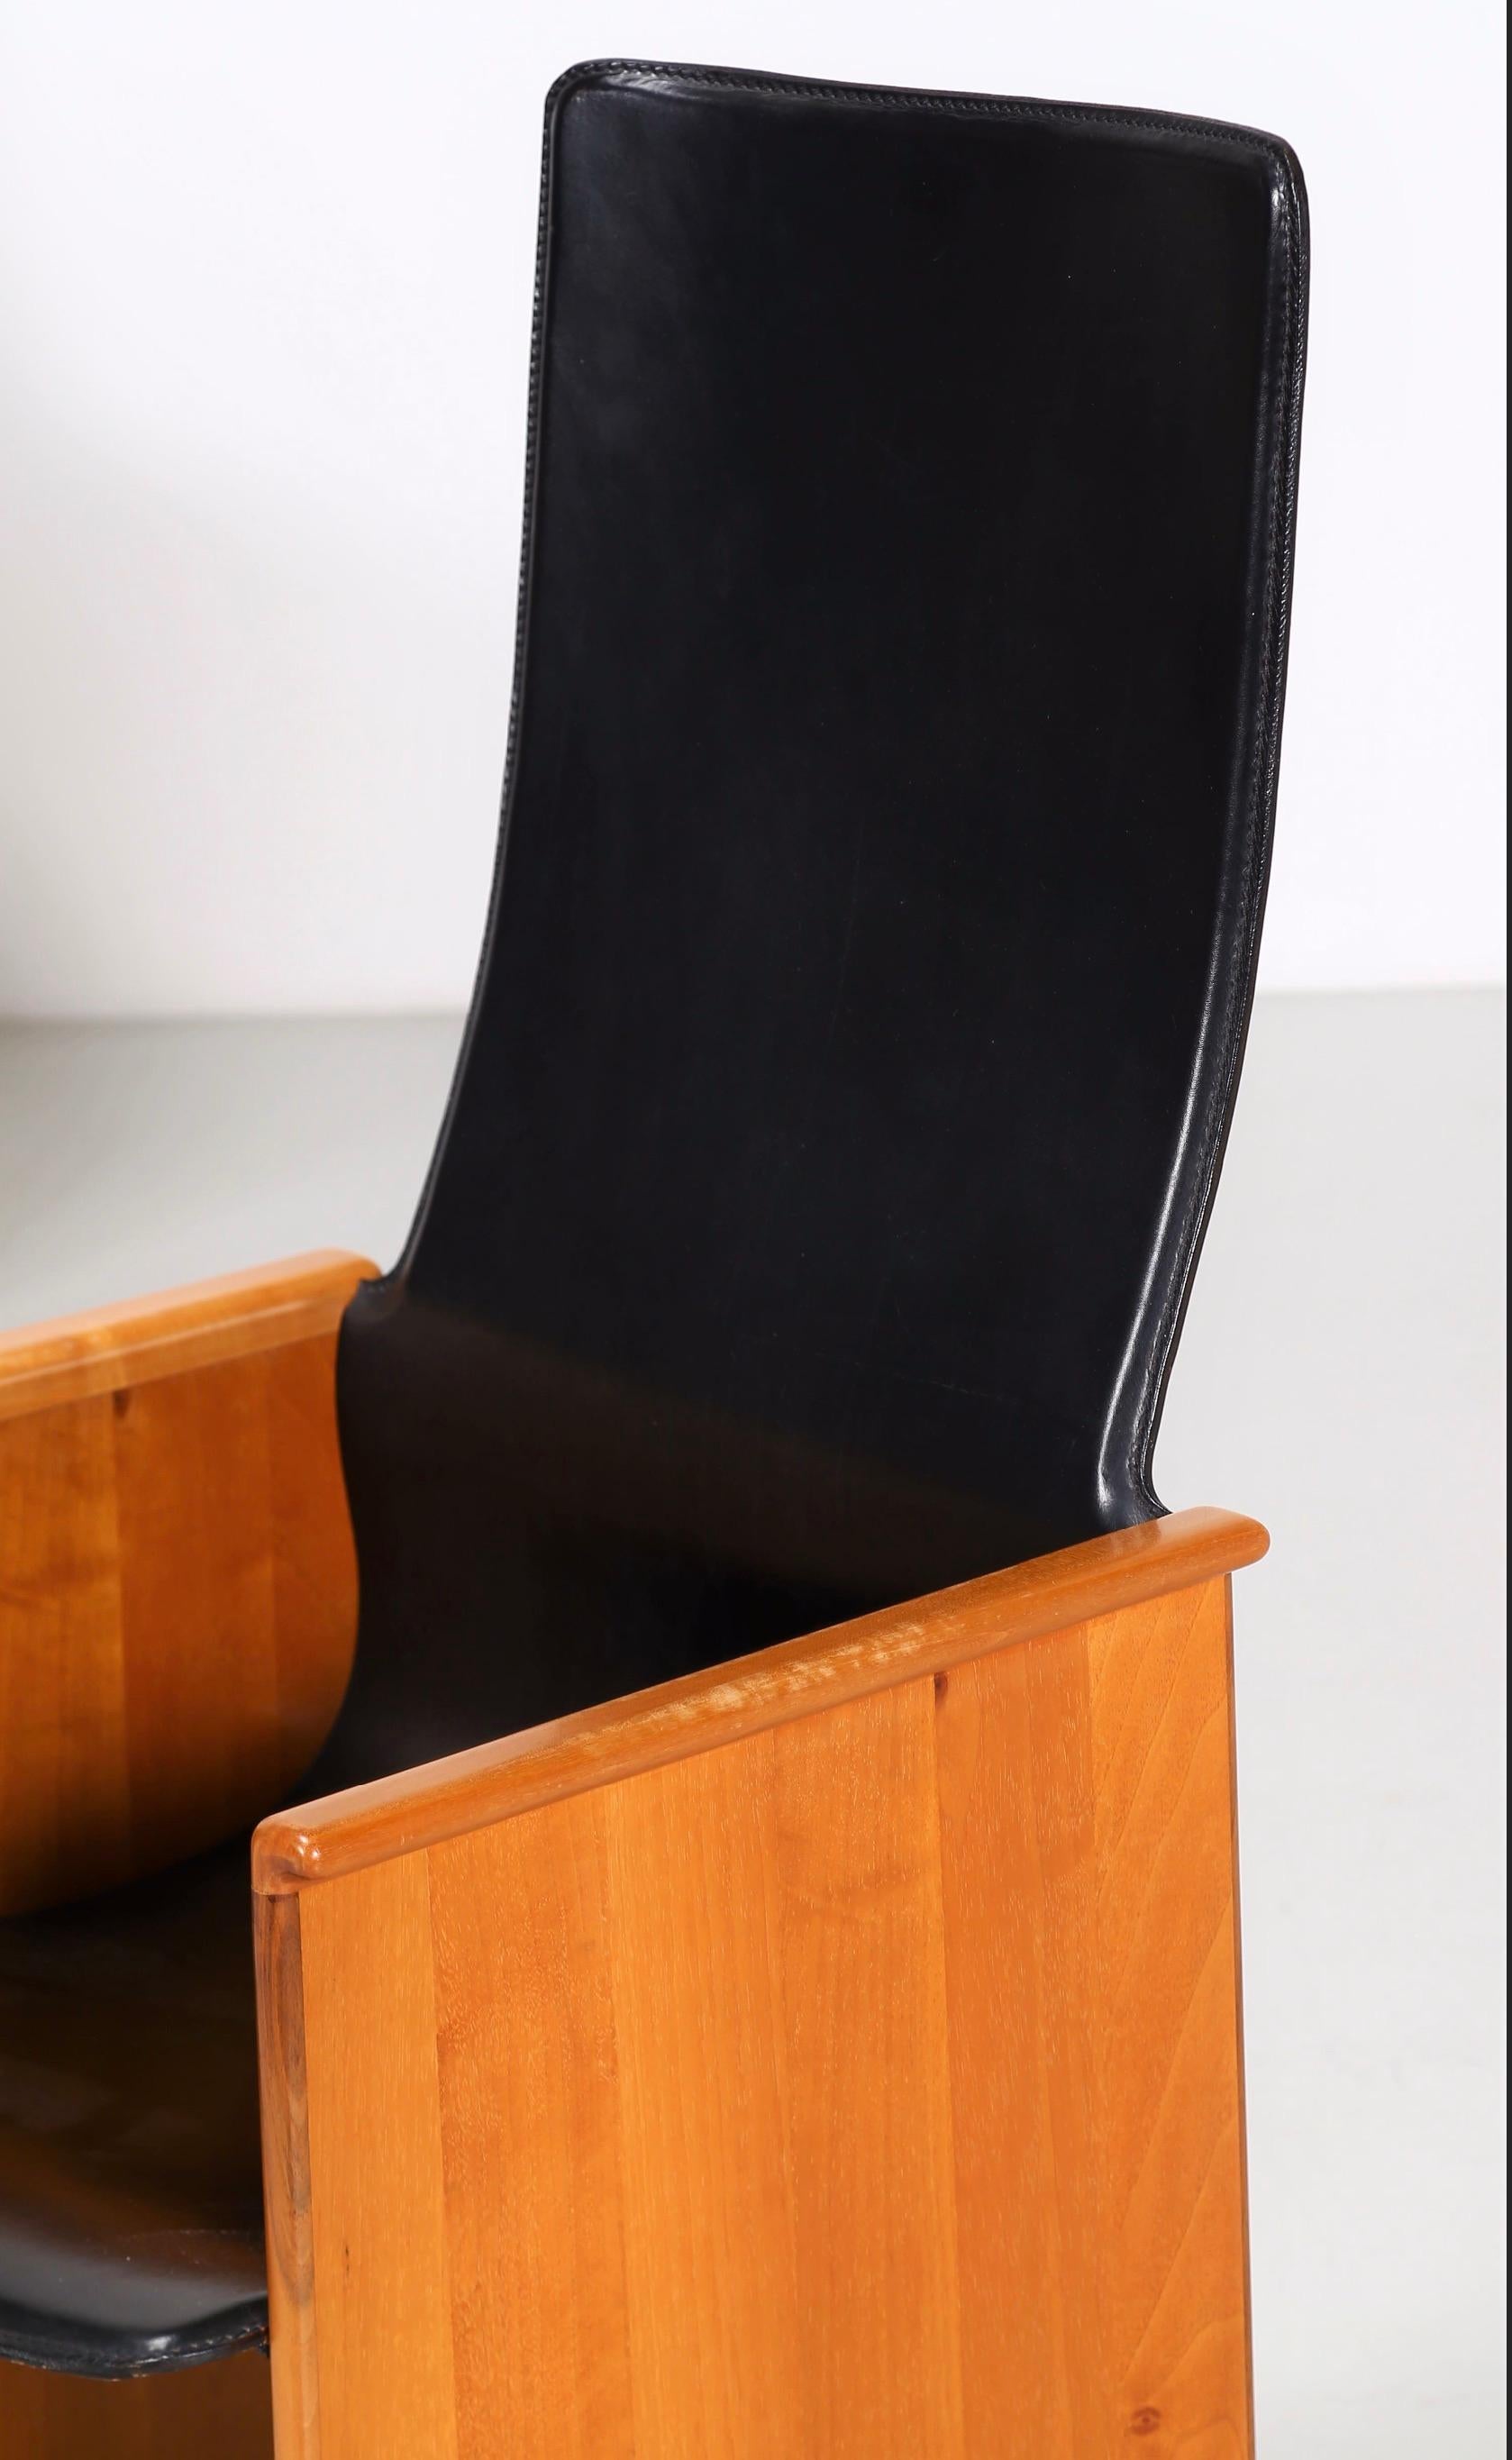 Afra and Tobias Scarpa for Stildomus
Set of four  « Torcello » dining chairs 
Walnut and leather
1964
105 x 51 x 43 cm


Those Sculptural high chairs, are composed of a black leather seats which embrace the ash wood structure, creating a nice